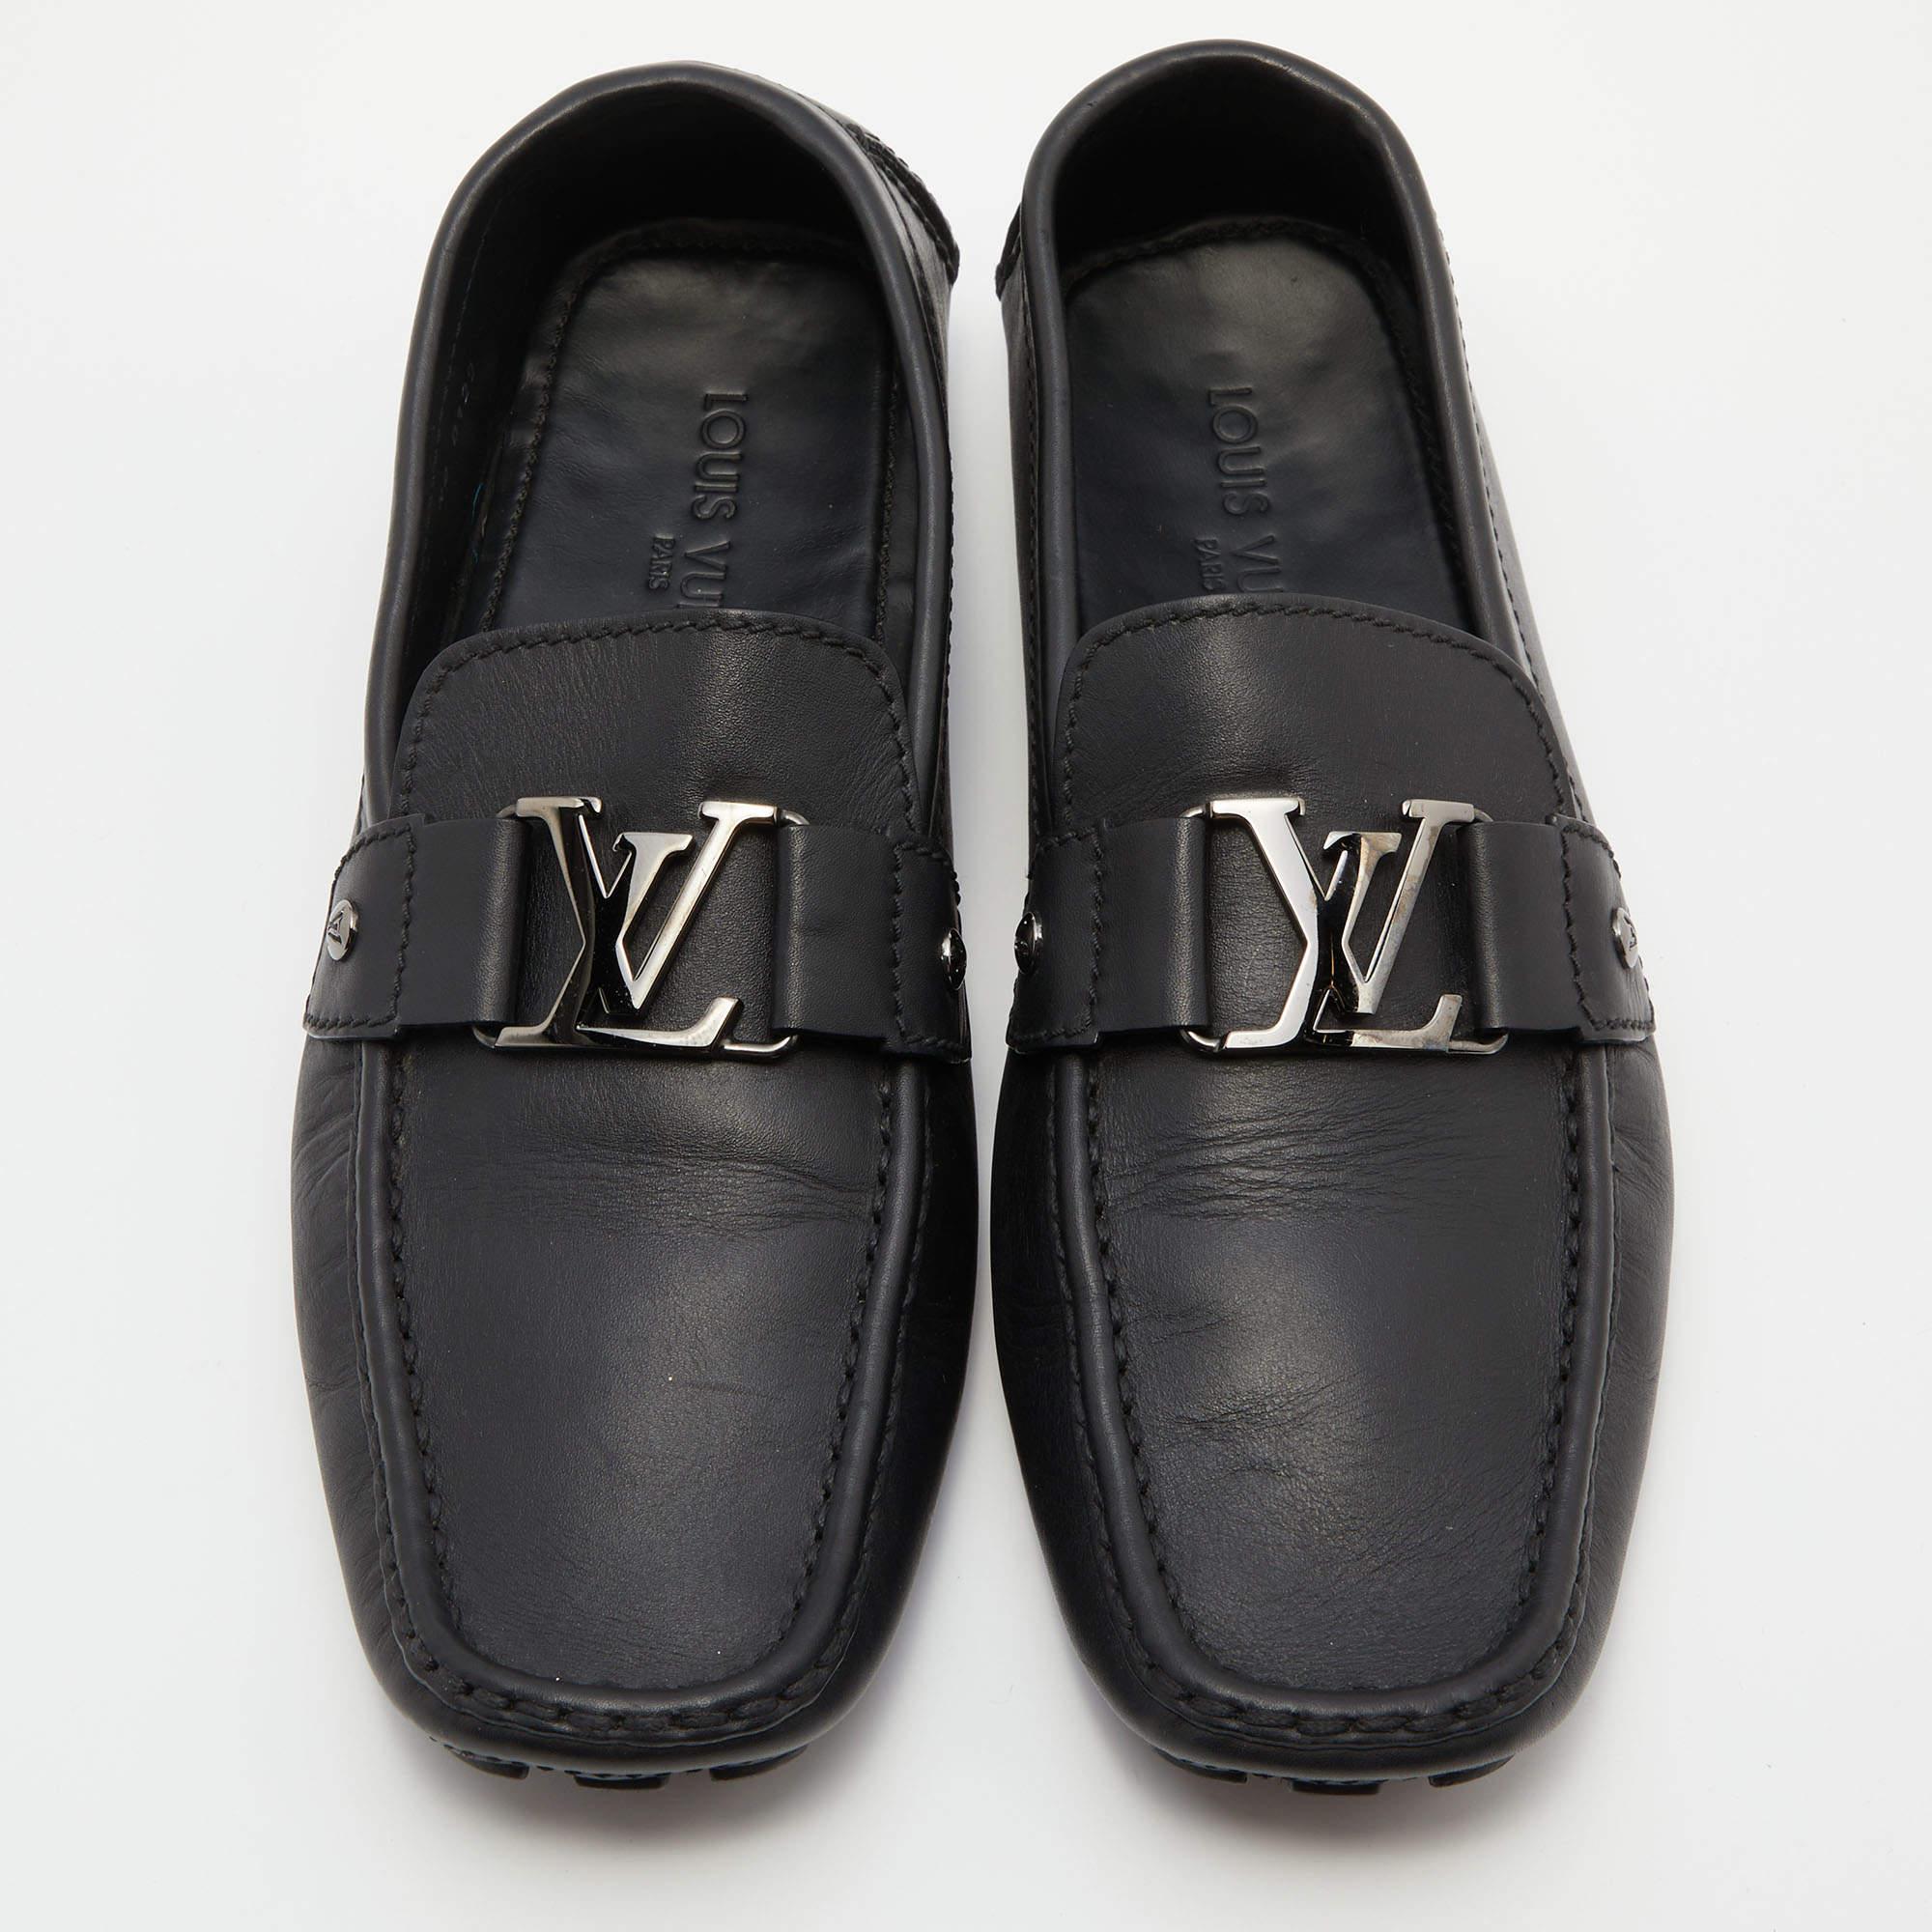 These Louis Vuitton loafers are durable and classy. Created from quality materials, they feature relaxing footbeds and will lend you optimal grip while walking.

